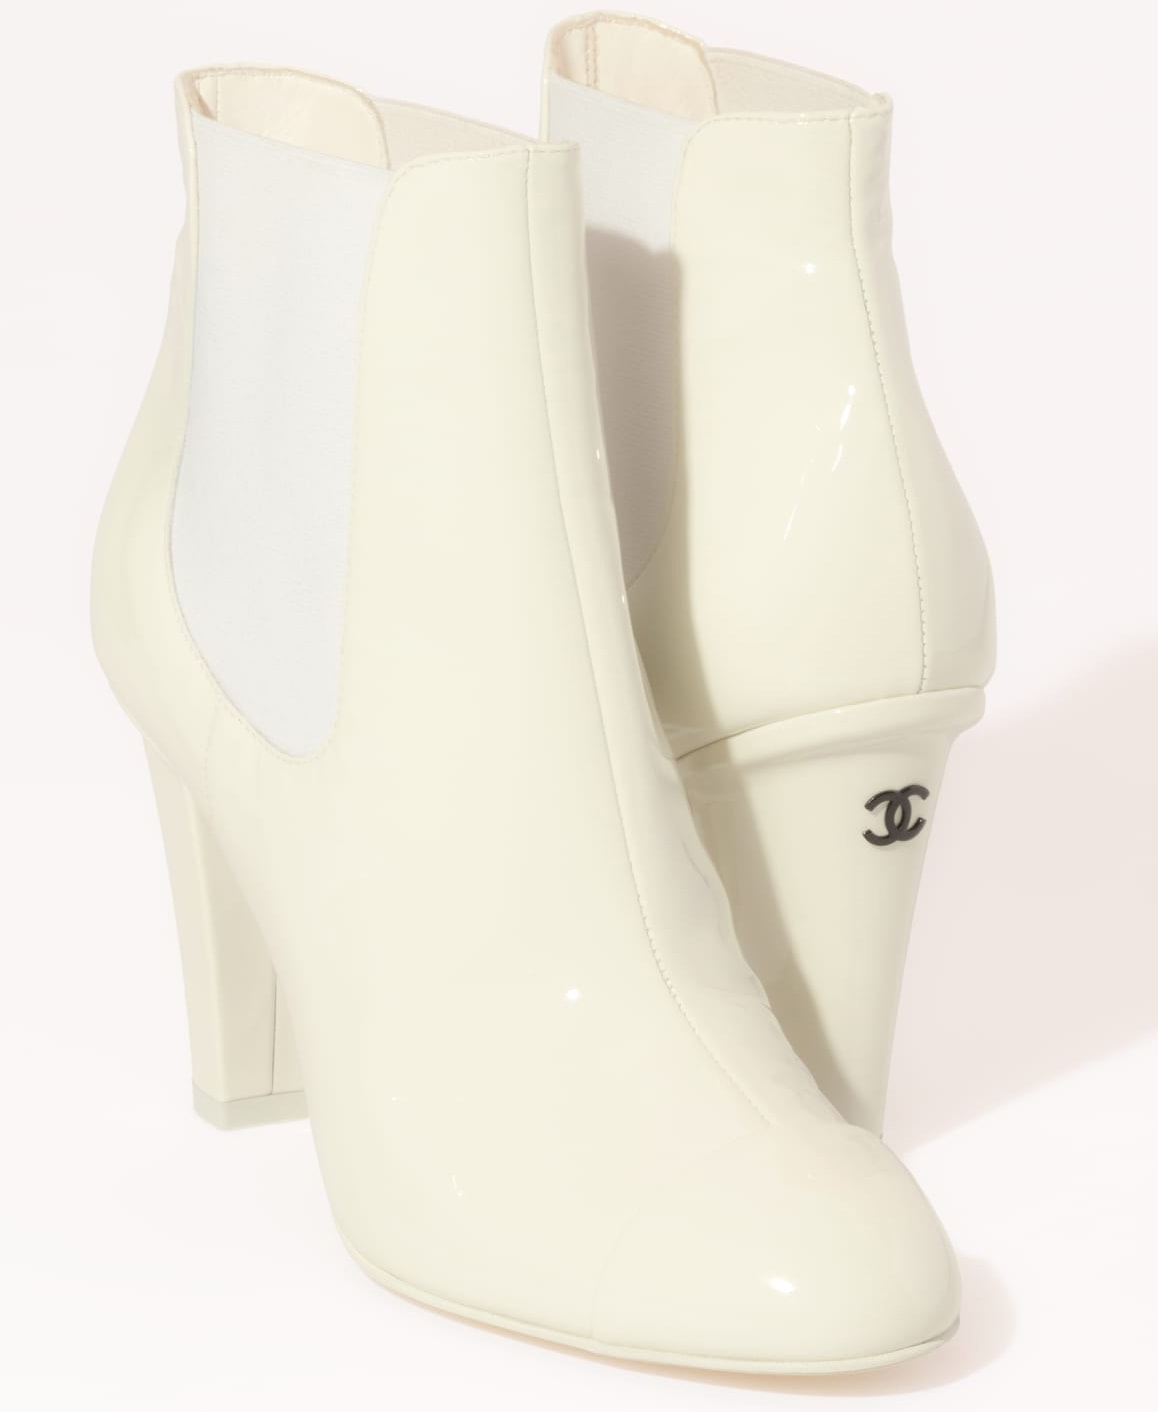 These Chanel ankle boots feature Chelsea-style elastic panels and angled heels accented with double C logo